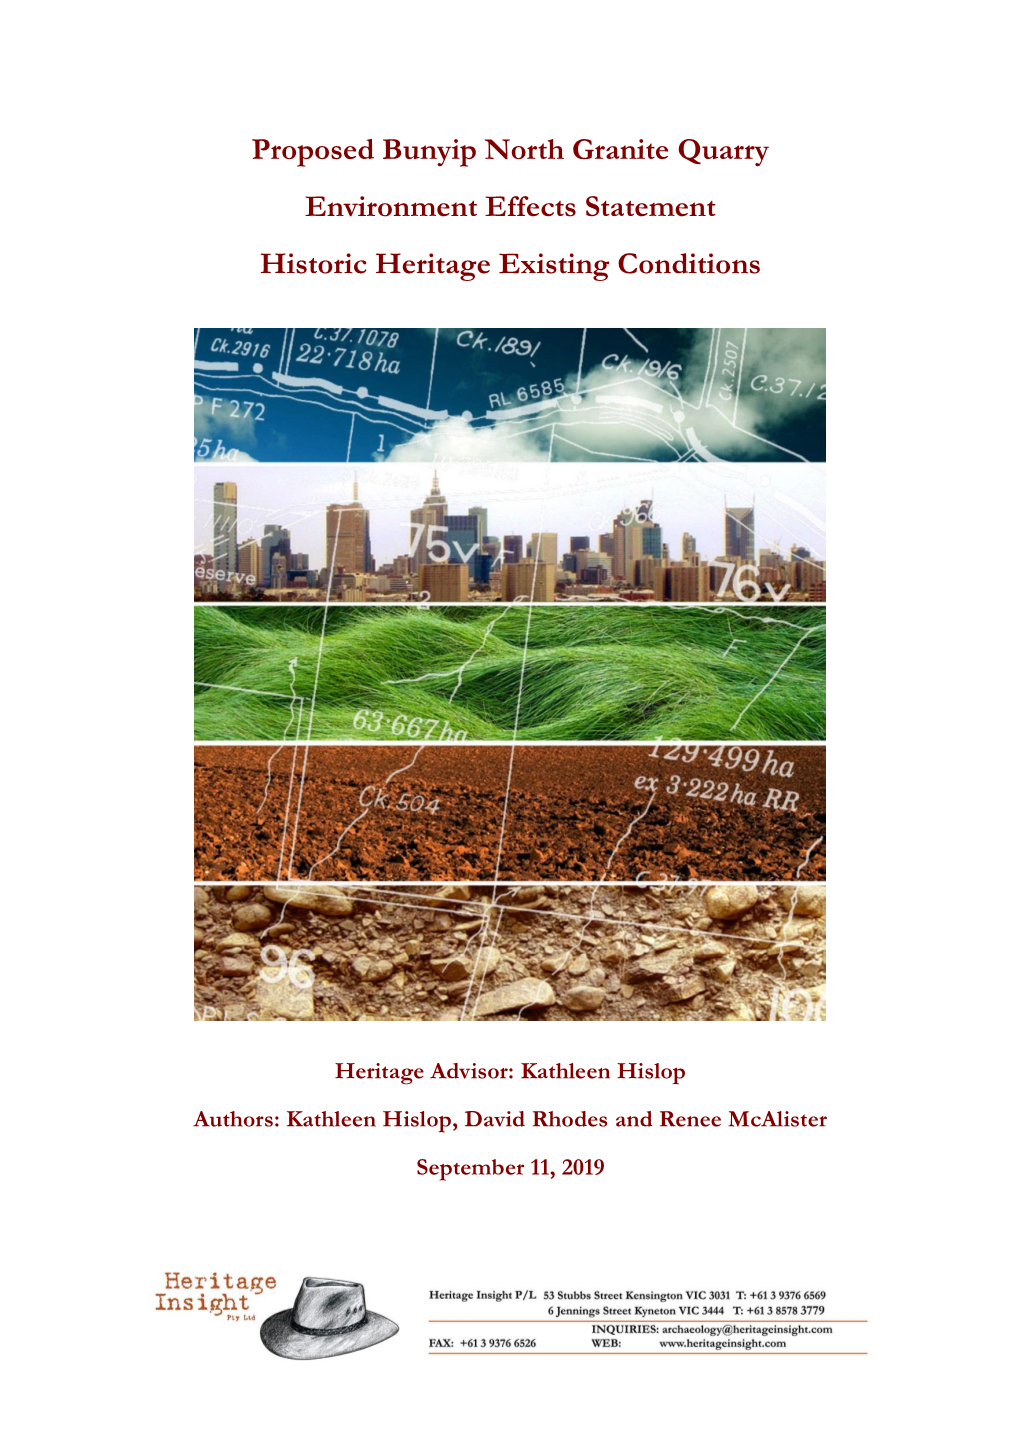 Environment Effects Statement & Historic Heritage Existing Conditions